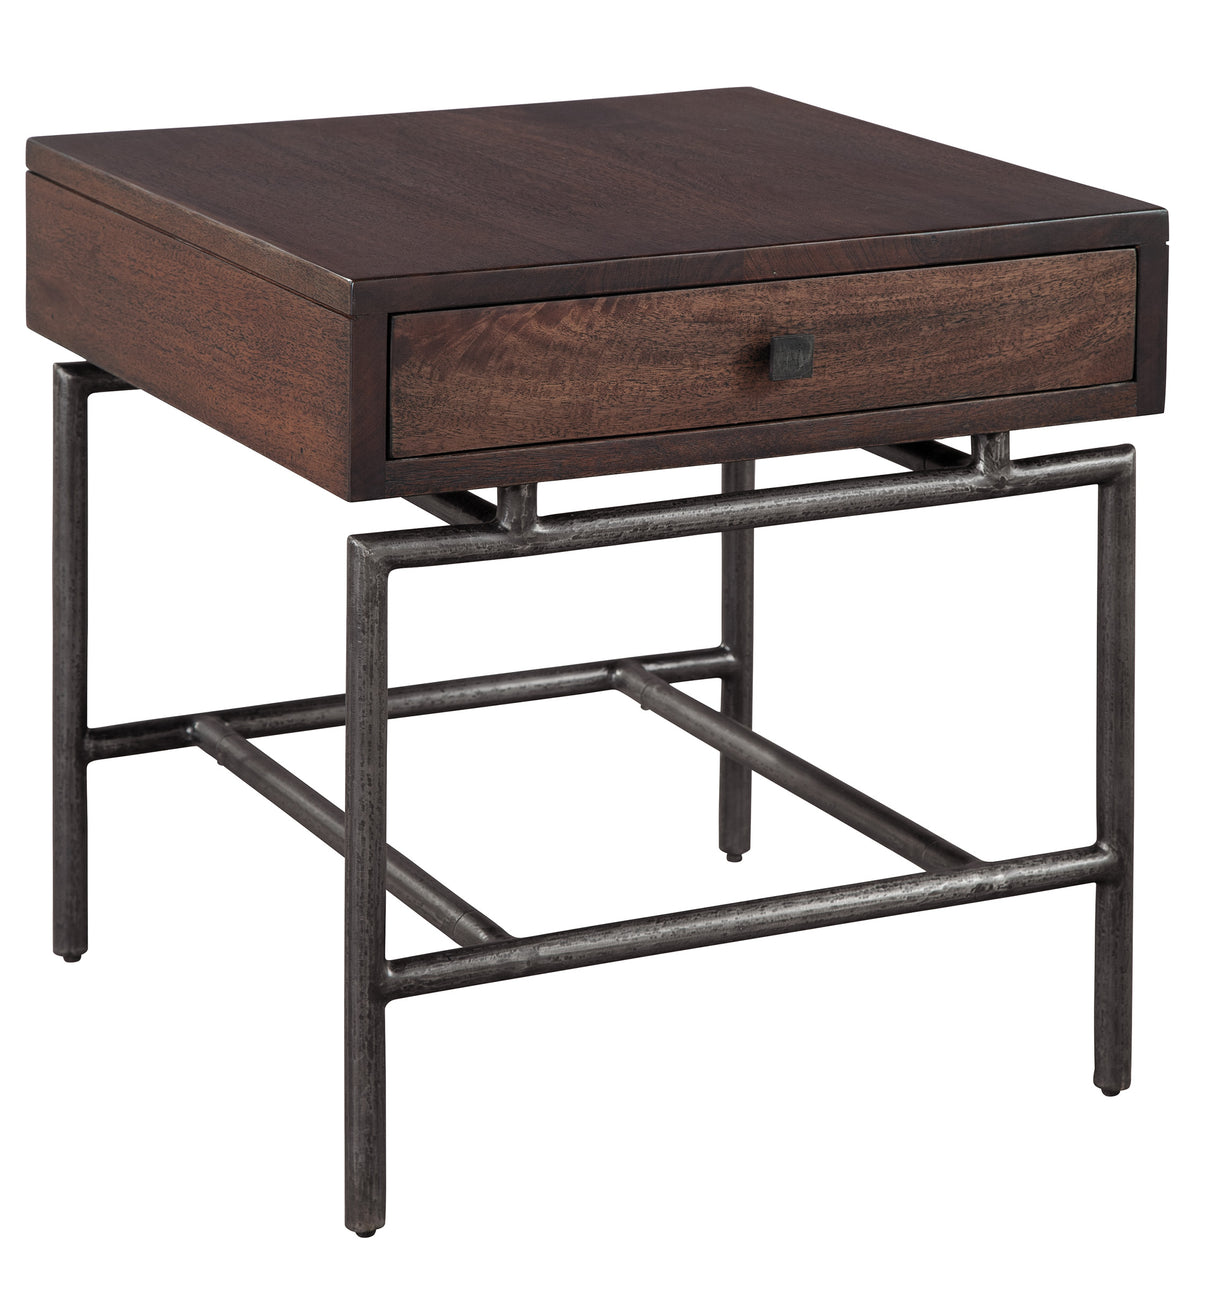 Hekman 24203 Accents 24in. x 24in. x 26in. End Table